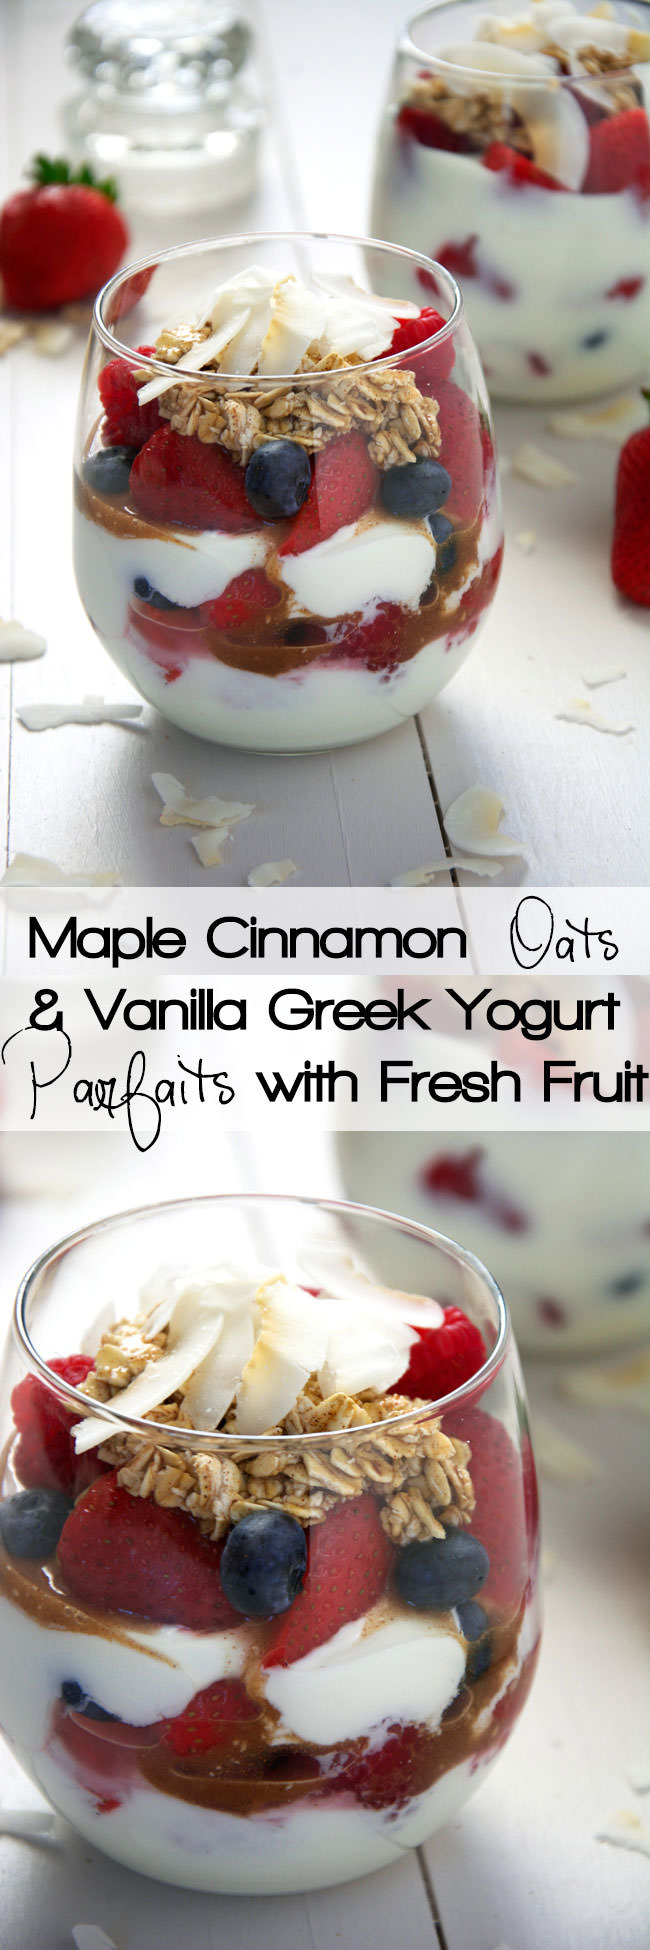 Fresh fruit, cookie dough like maple and cinnamon oats with creamy vanilla yogurt makes this parfait a simple make ahead, no brainer breakfast! 